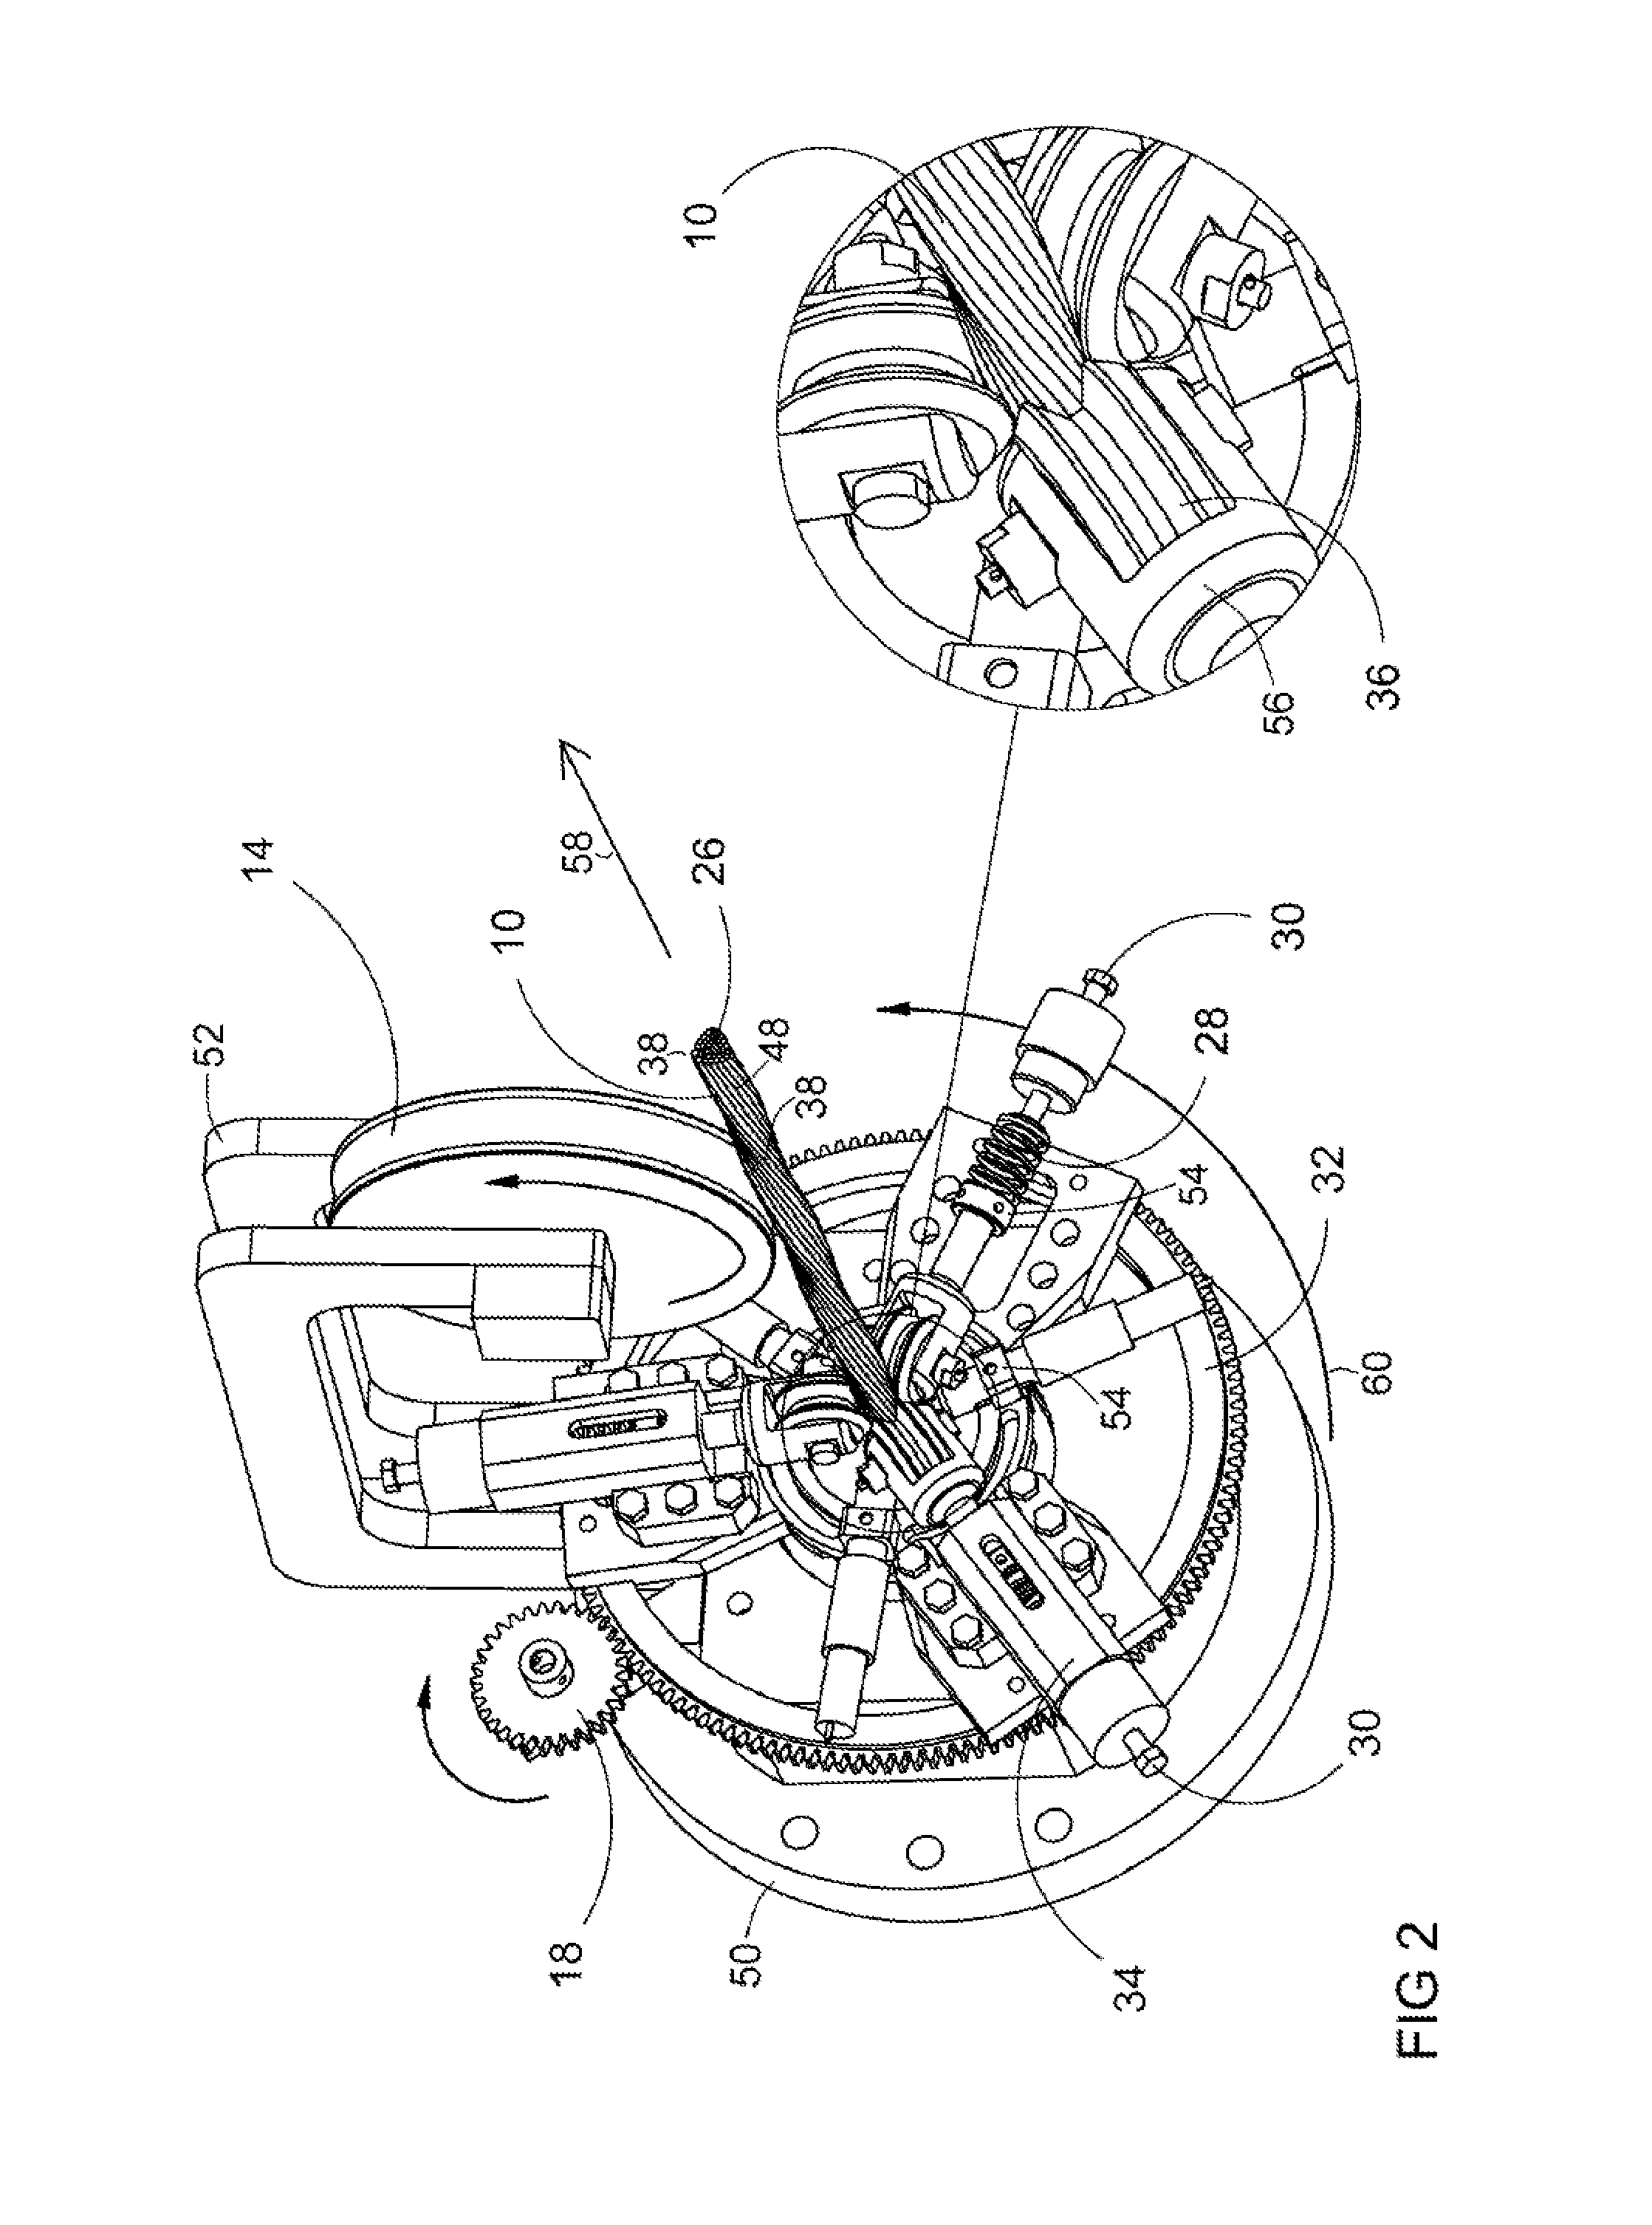 System and method for measuring geometry of non-circular twisted strand during stranding process